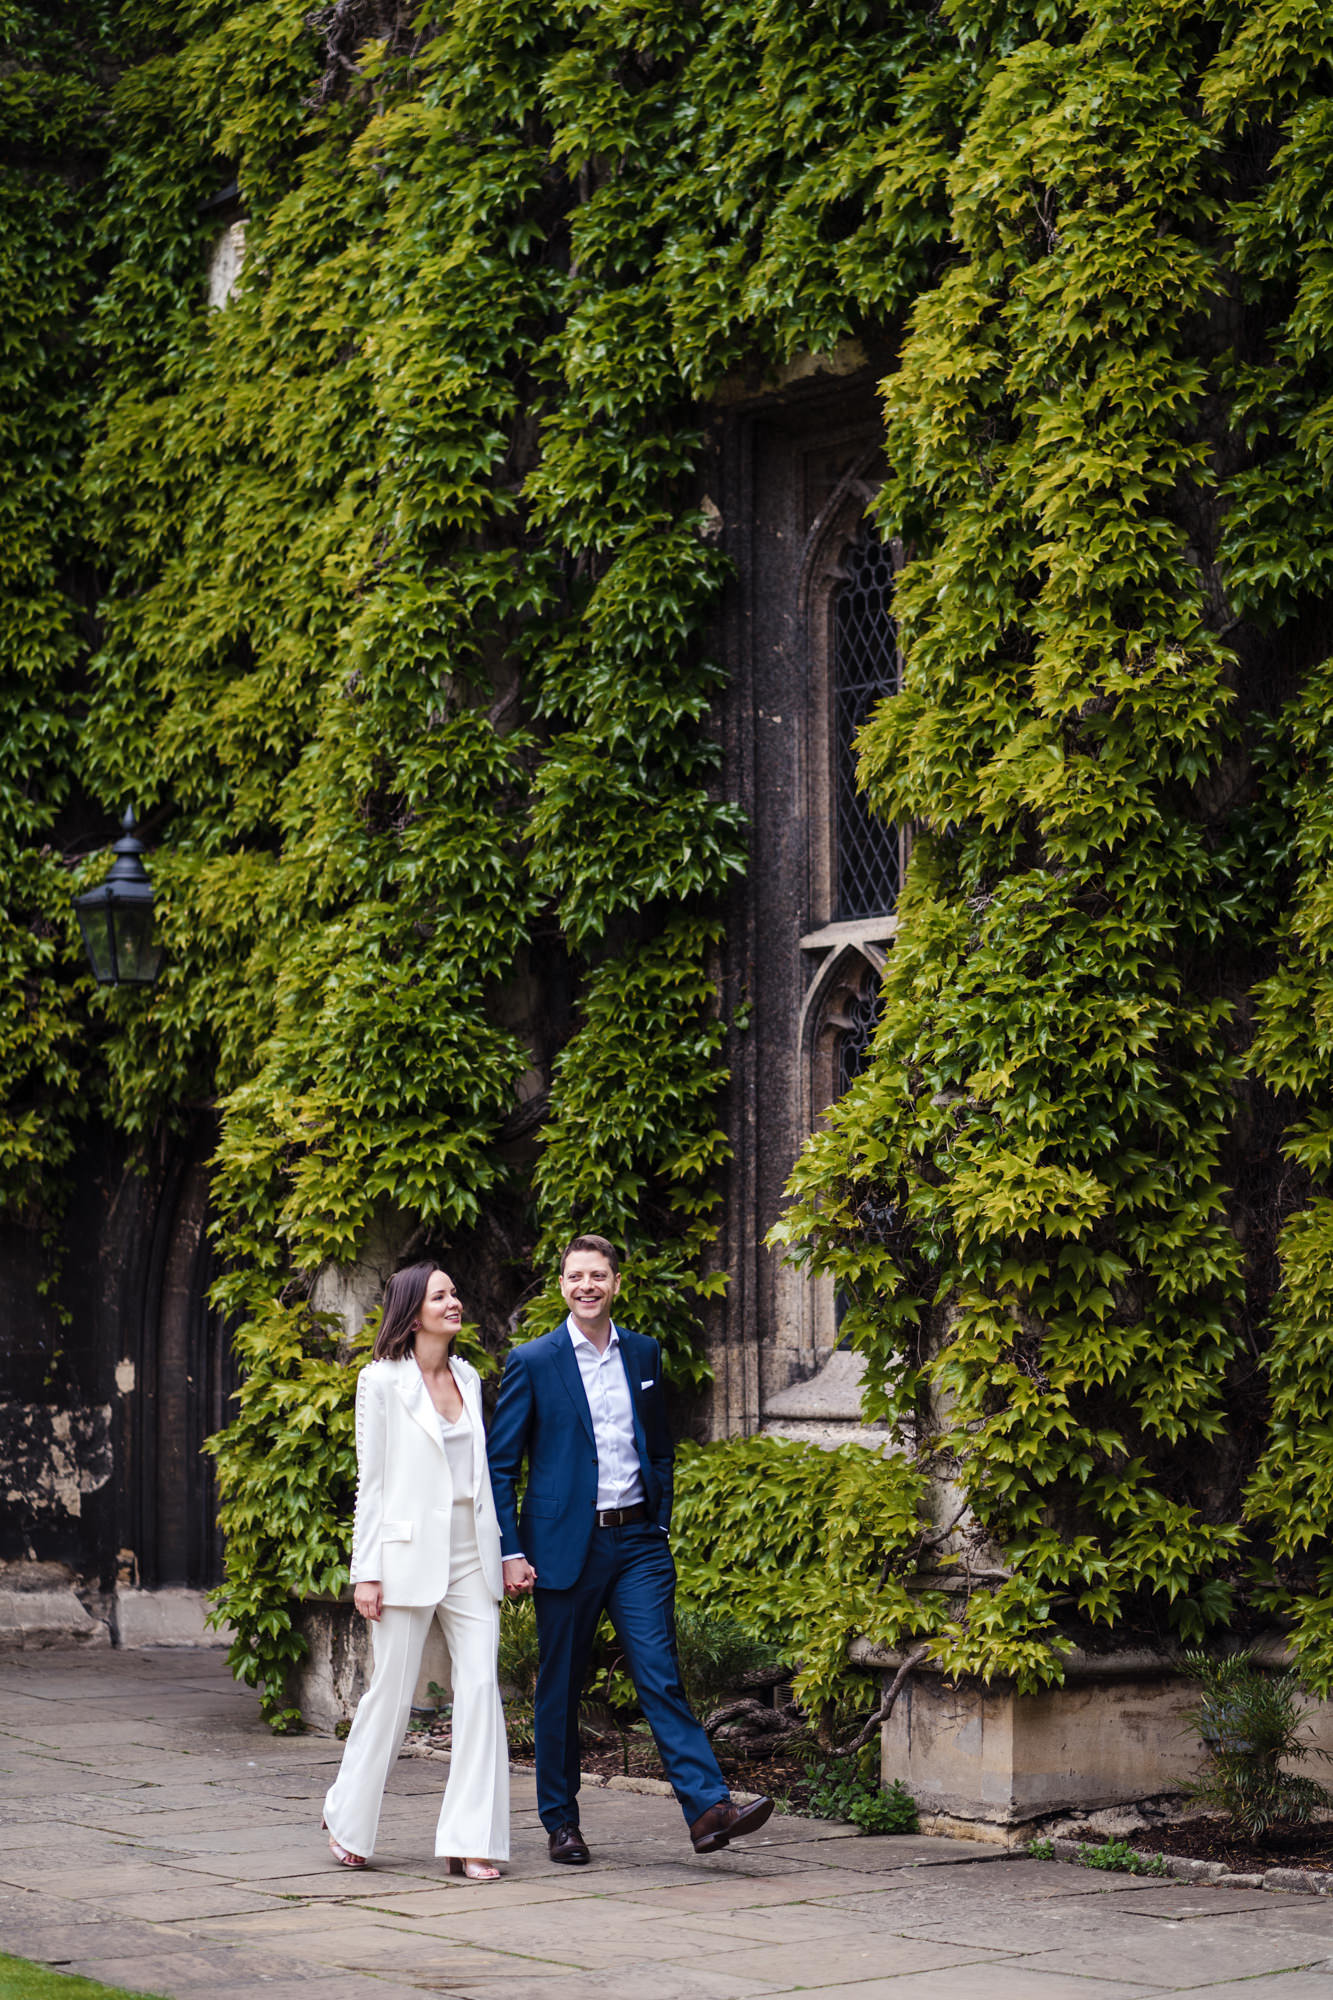 bride and groom look relaxed and happy as they stroll past ivy walls in oxford for their city elopement